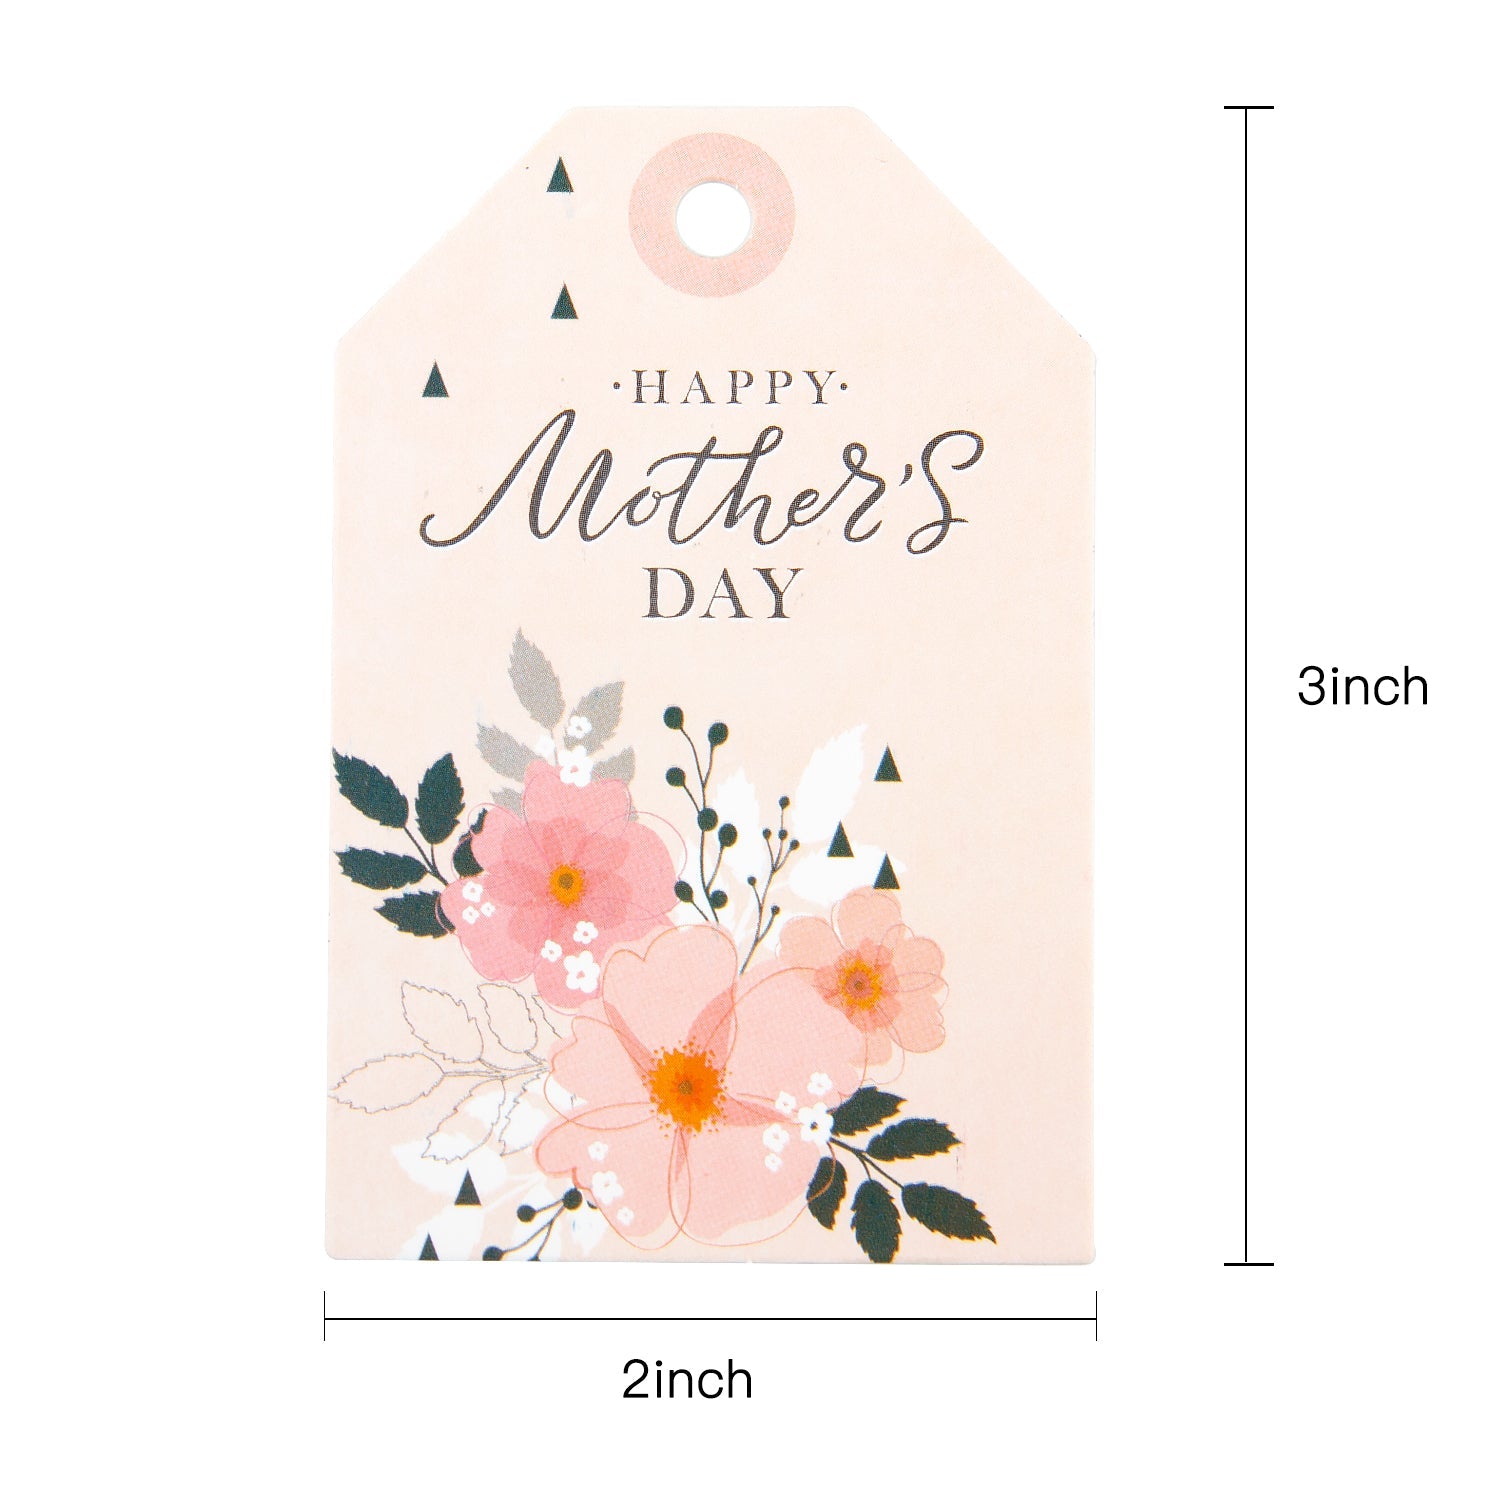 Gift Tags with String - 100pcs Happy Mother's Day Floral Design Paper Tags w/ 100ft Natural Jute Twine